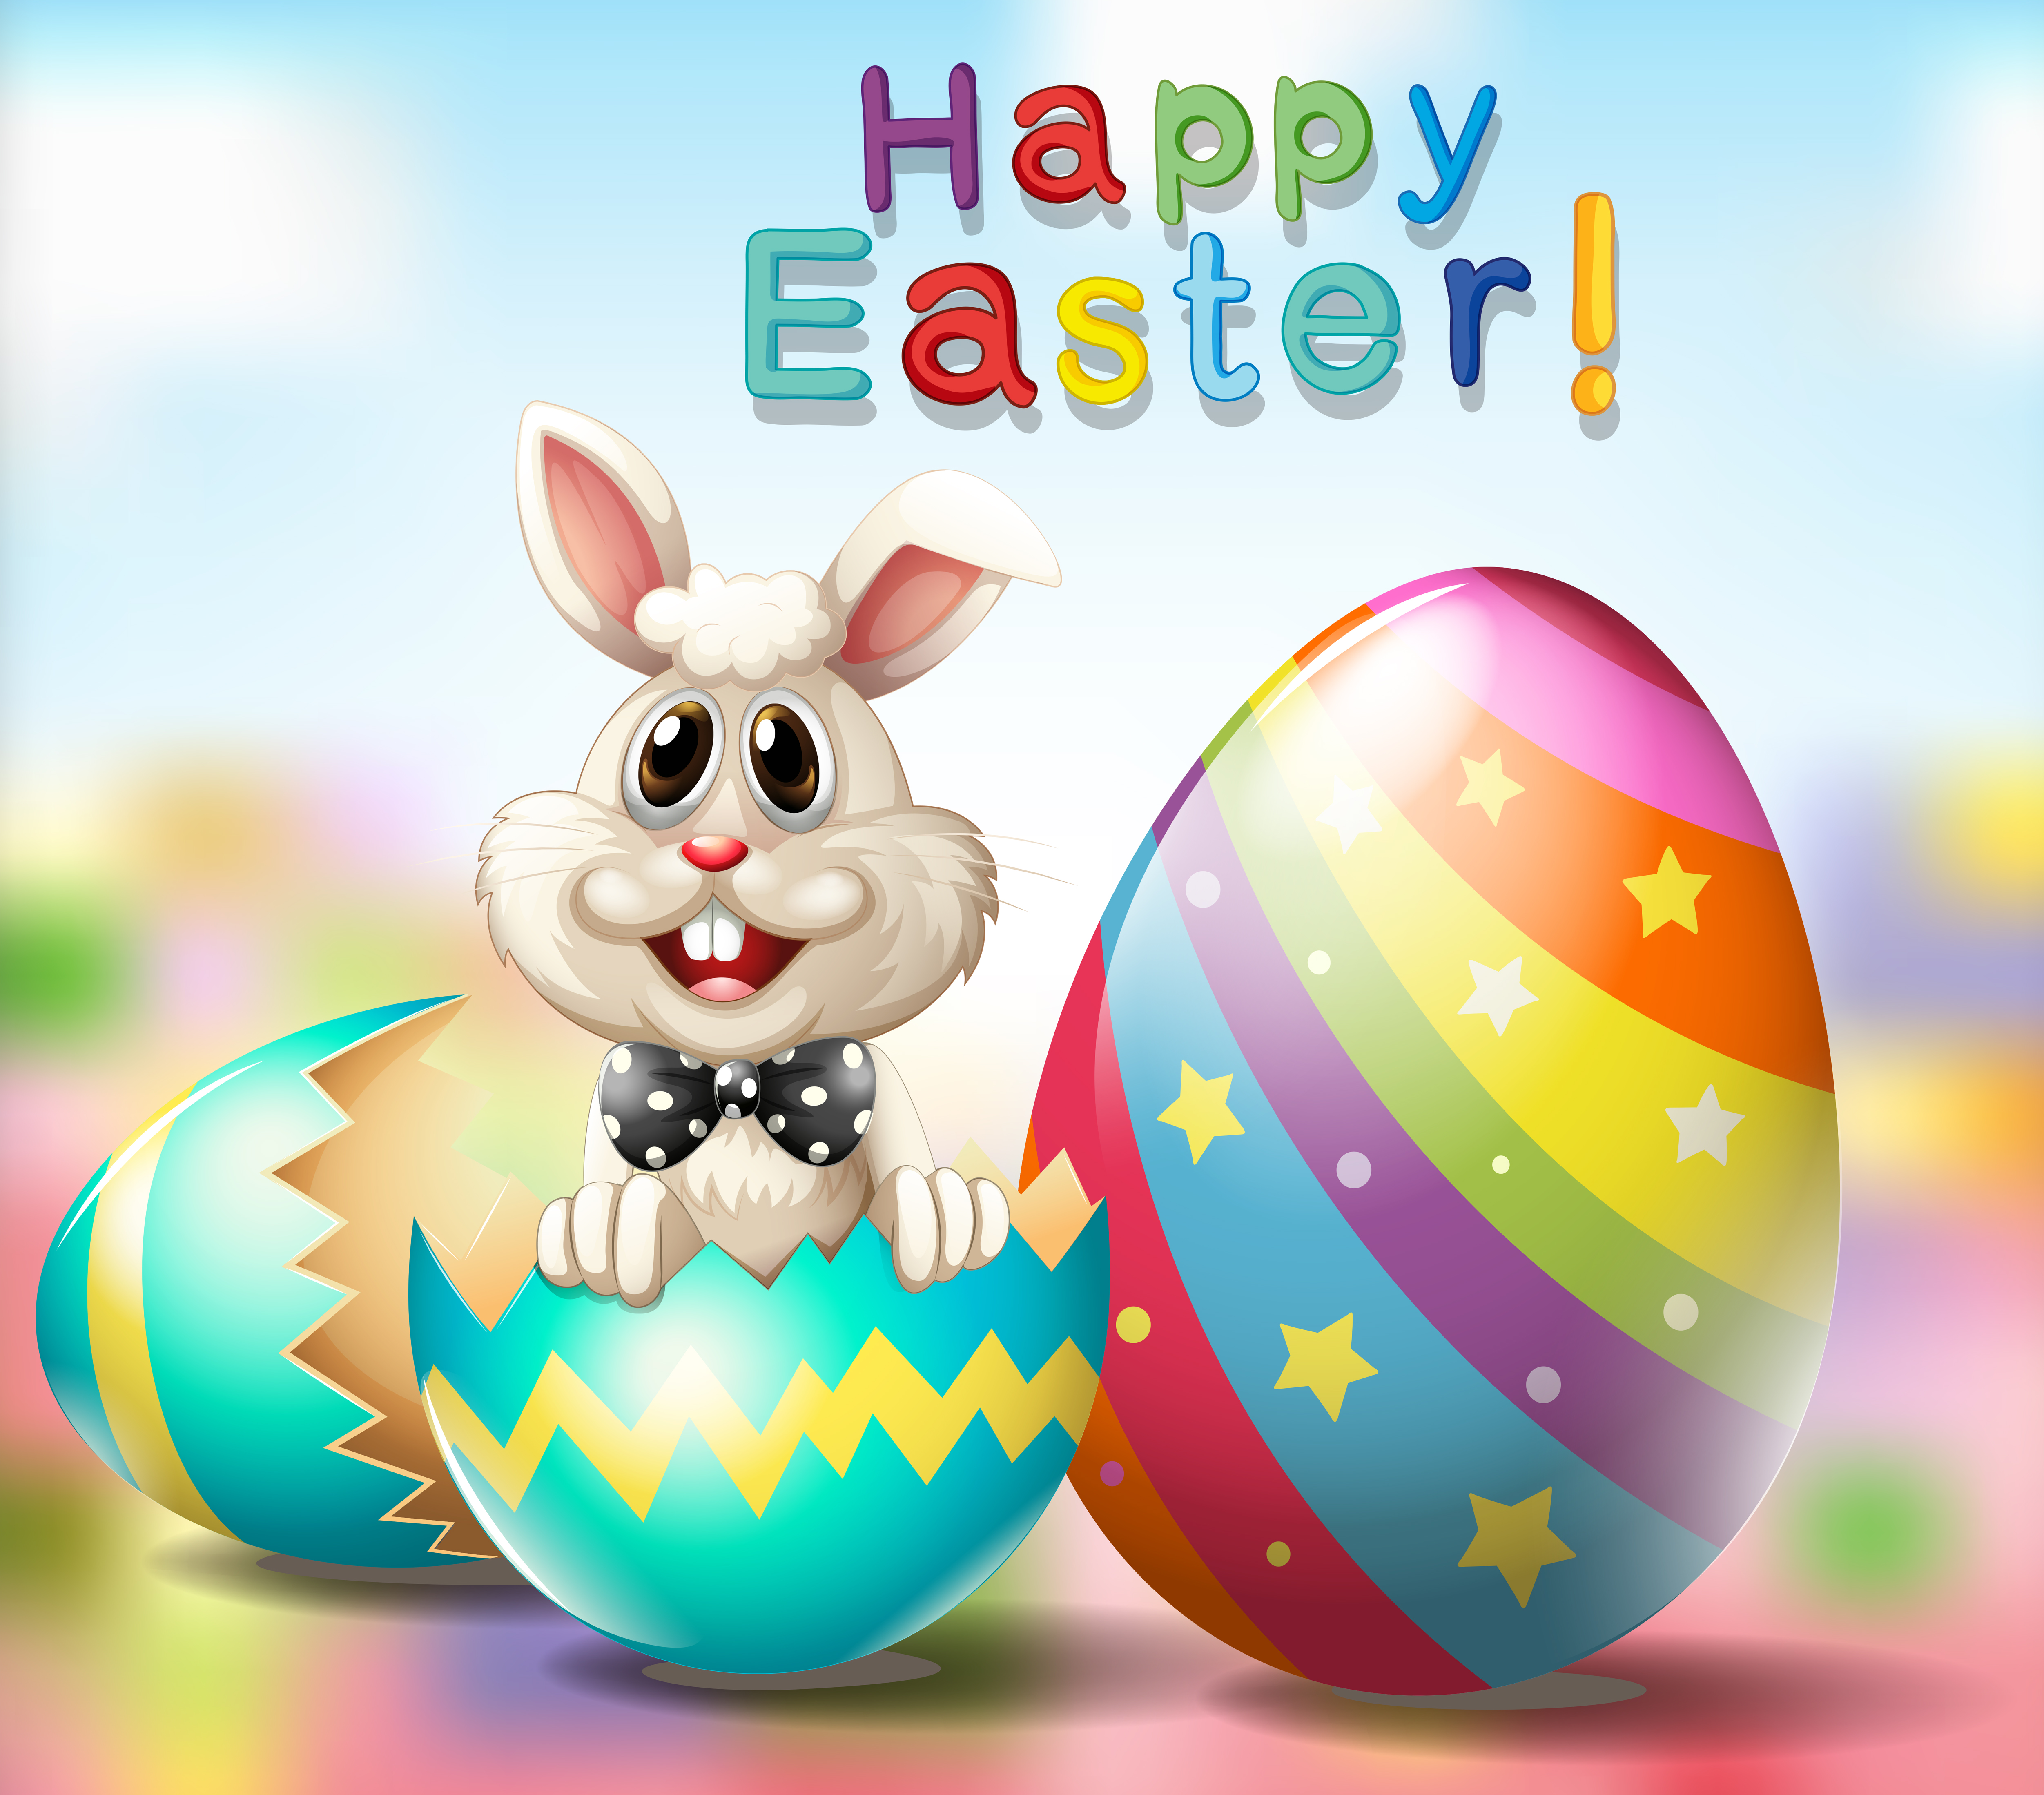 Happy Easter Poster With Bunny And Rainbow Eggs 519974 Vector Art At Vecteezy